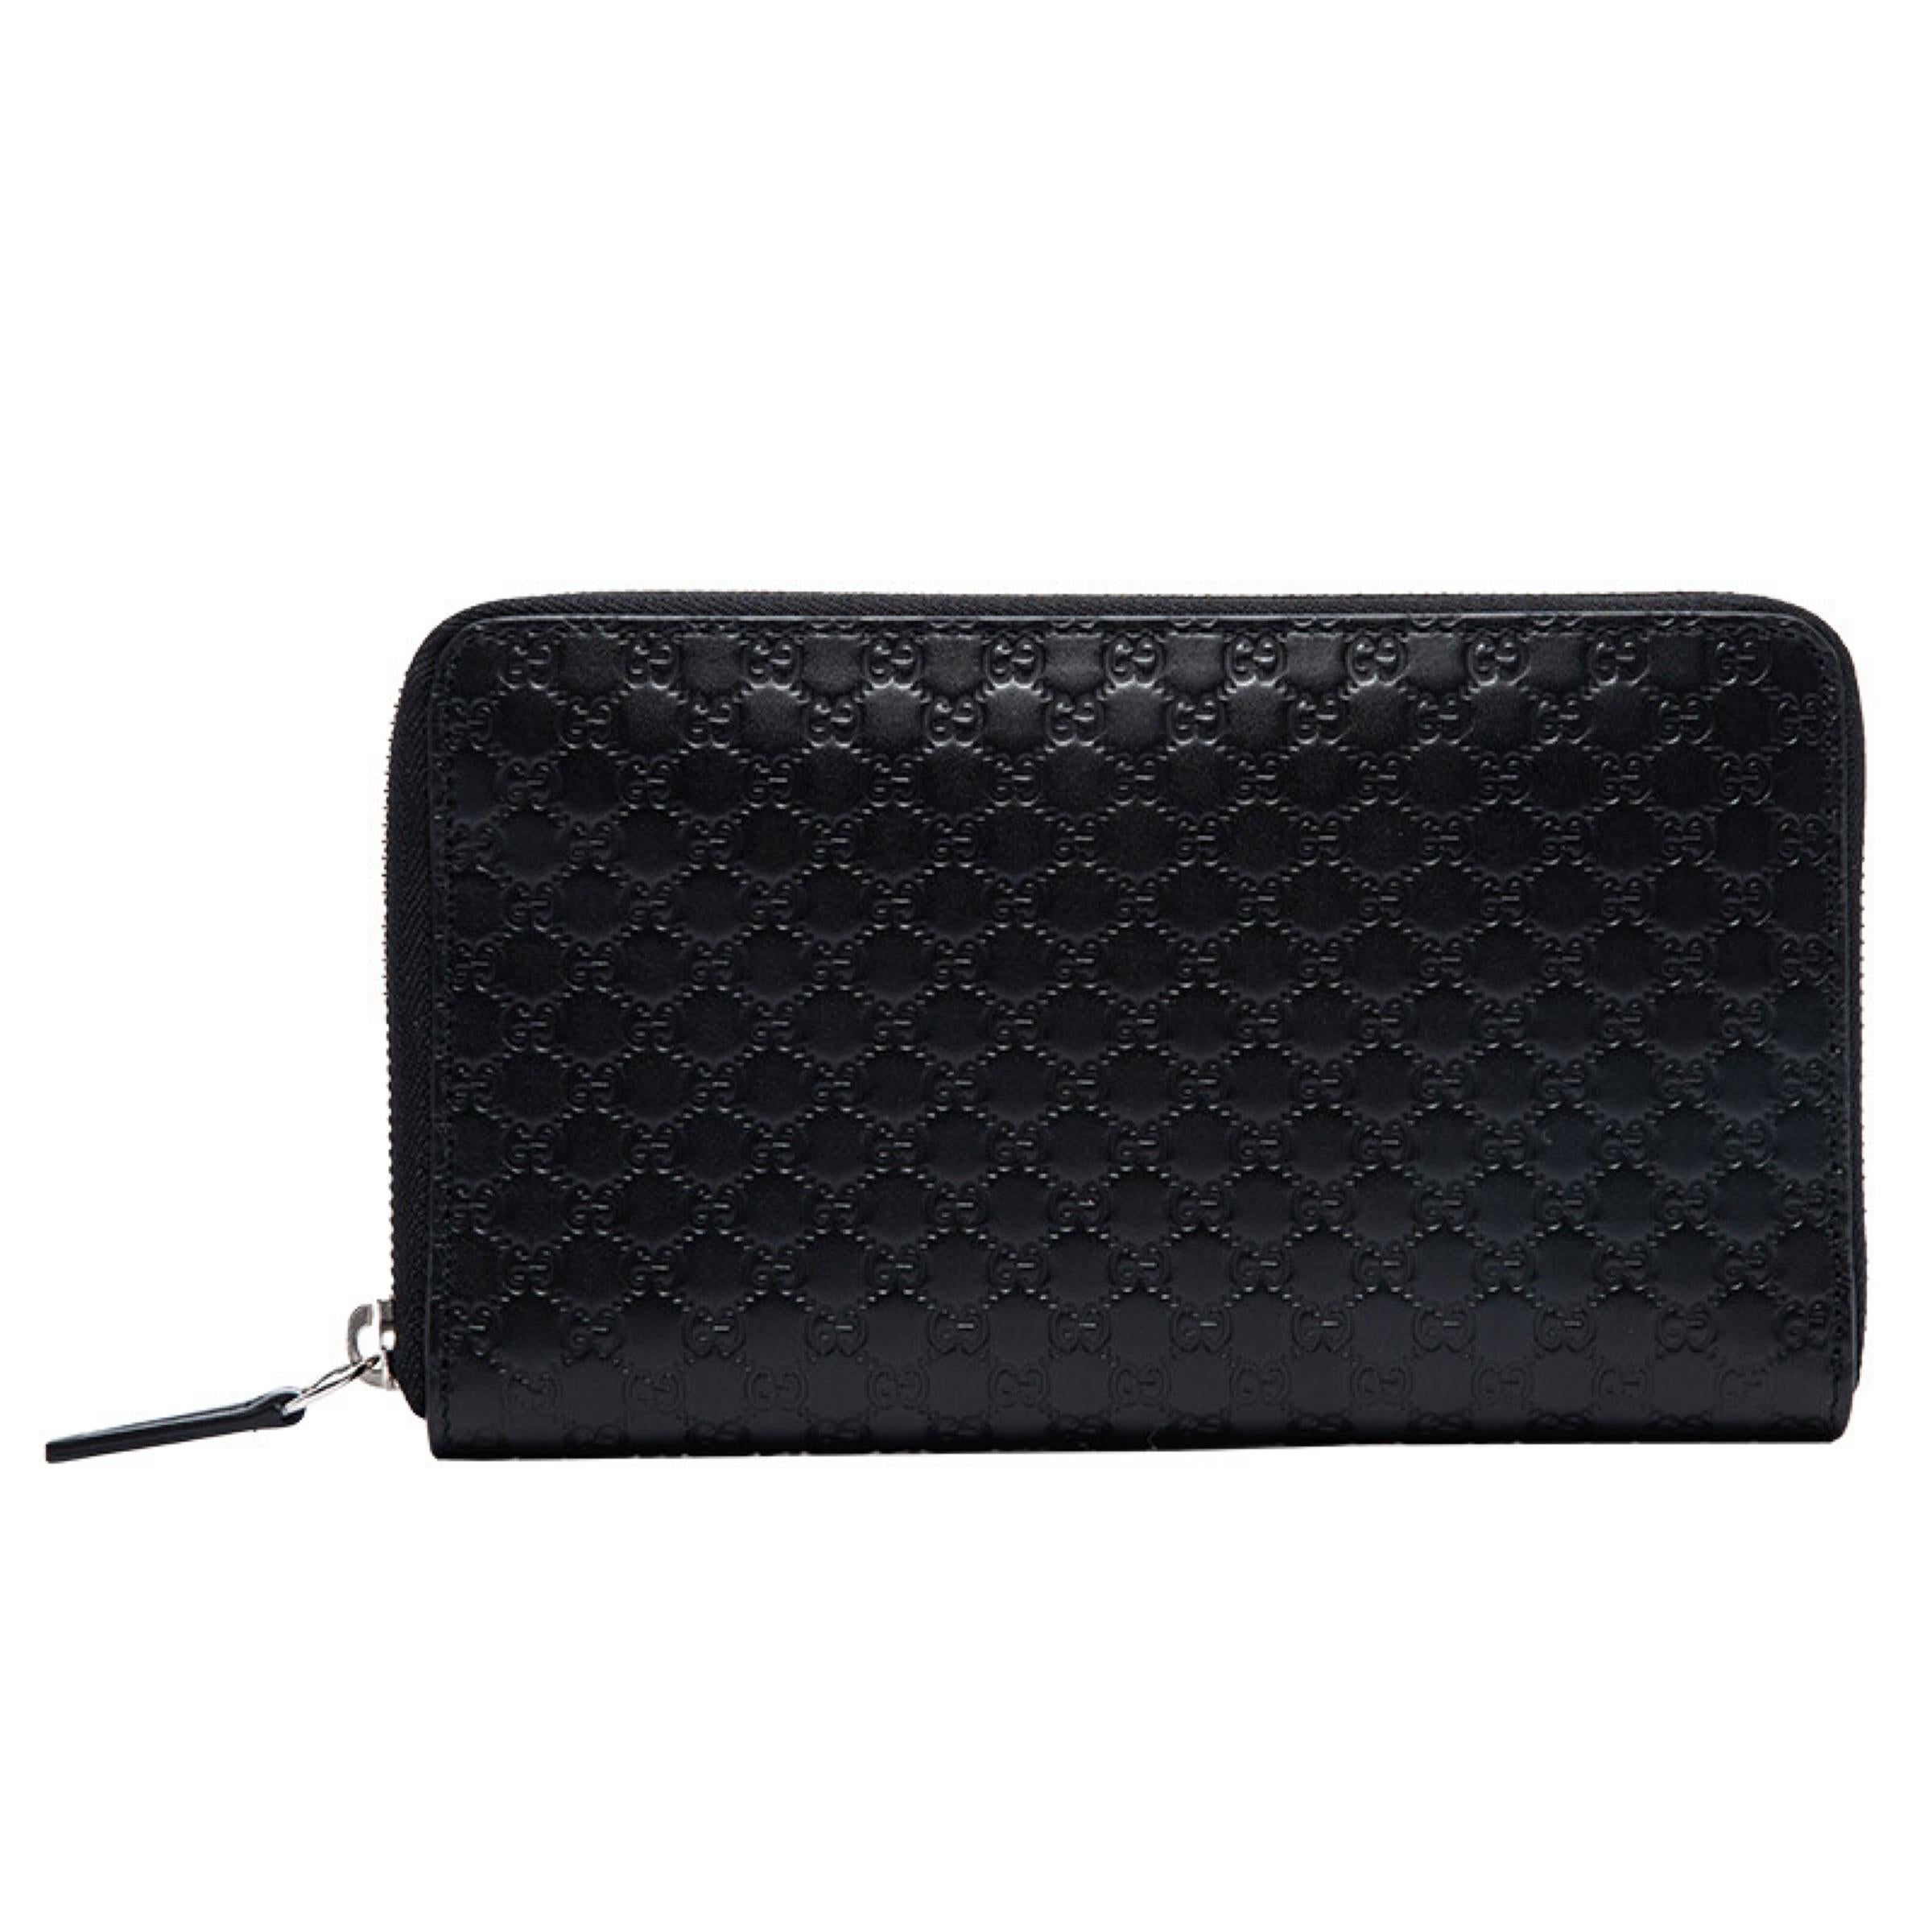 New Gucci Black GG Guccissima Monogram Leather Zip Around Clutch Bag

Authenticity Guaranteed

DETAILS
Brand: Gucci
Condition: Brand new
Gender: Unisex
Category: Clutch
Color: Black
Material: Leather
Monogram GG guccissima
Silver-tone hardware
Zip